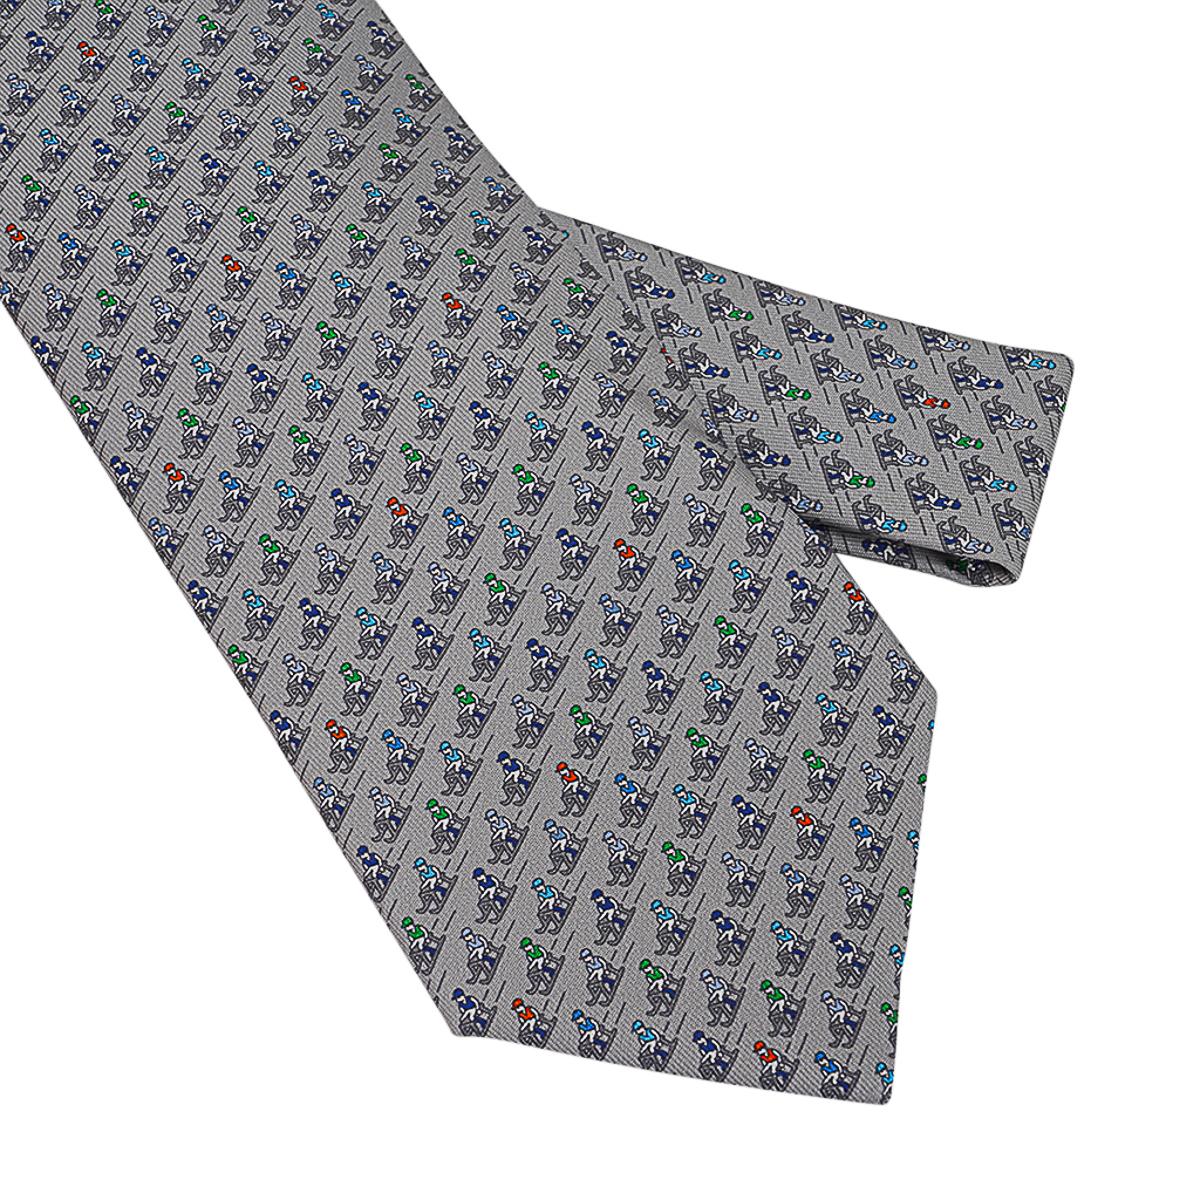 Mightychic offers an Guaranteed authentic Hermes Sliding Jockey Twillbi silk tie featured in Gris, Anthracite and Bleu colorway.
The tail hides the Ex-Libris coachman making a snowman and jockeys downhill sledding!
Designed by Philippe Mouquet.
Hand